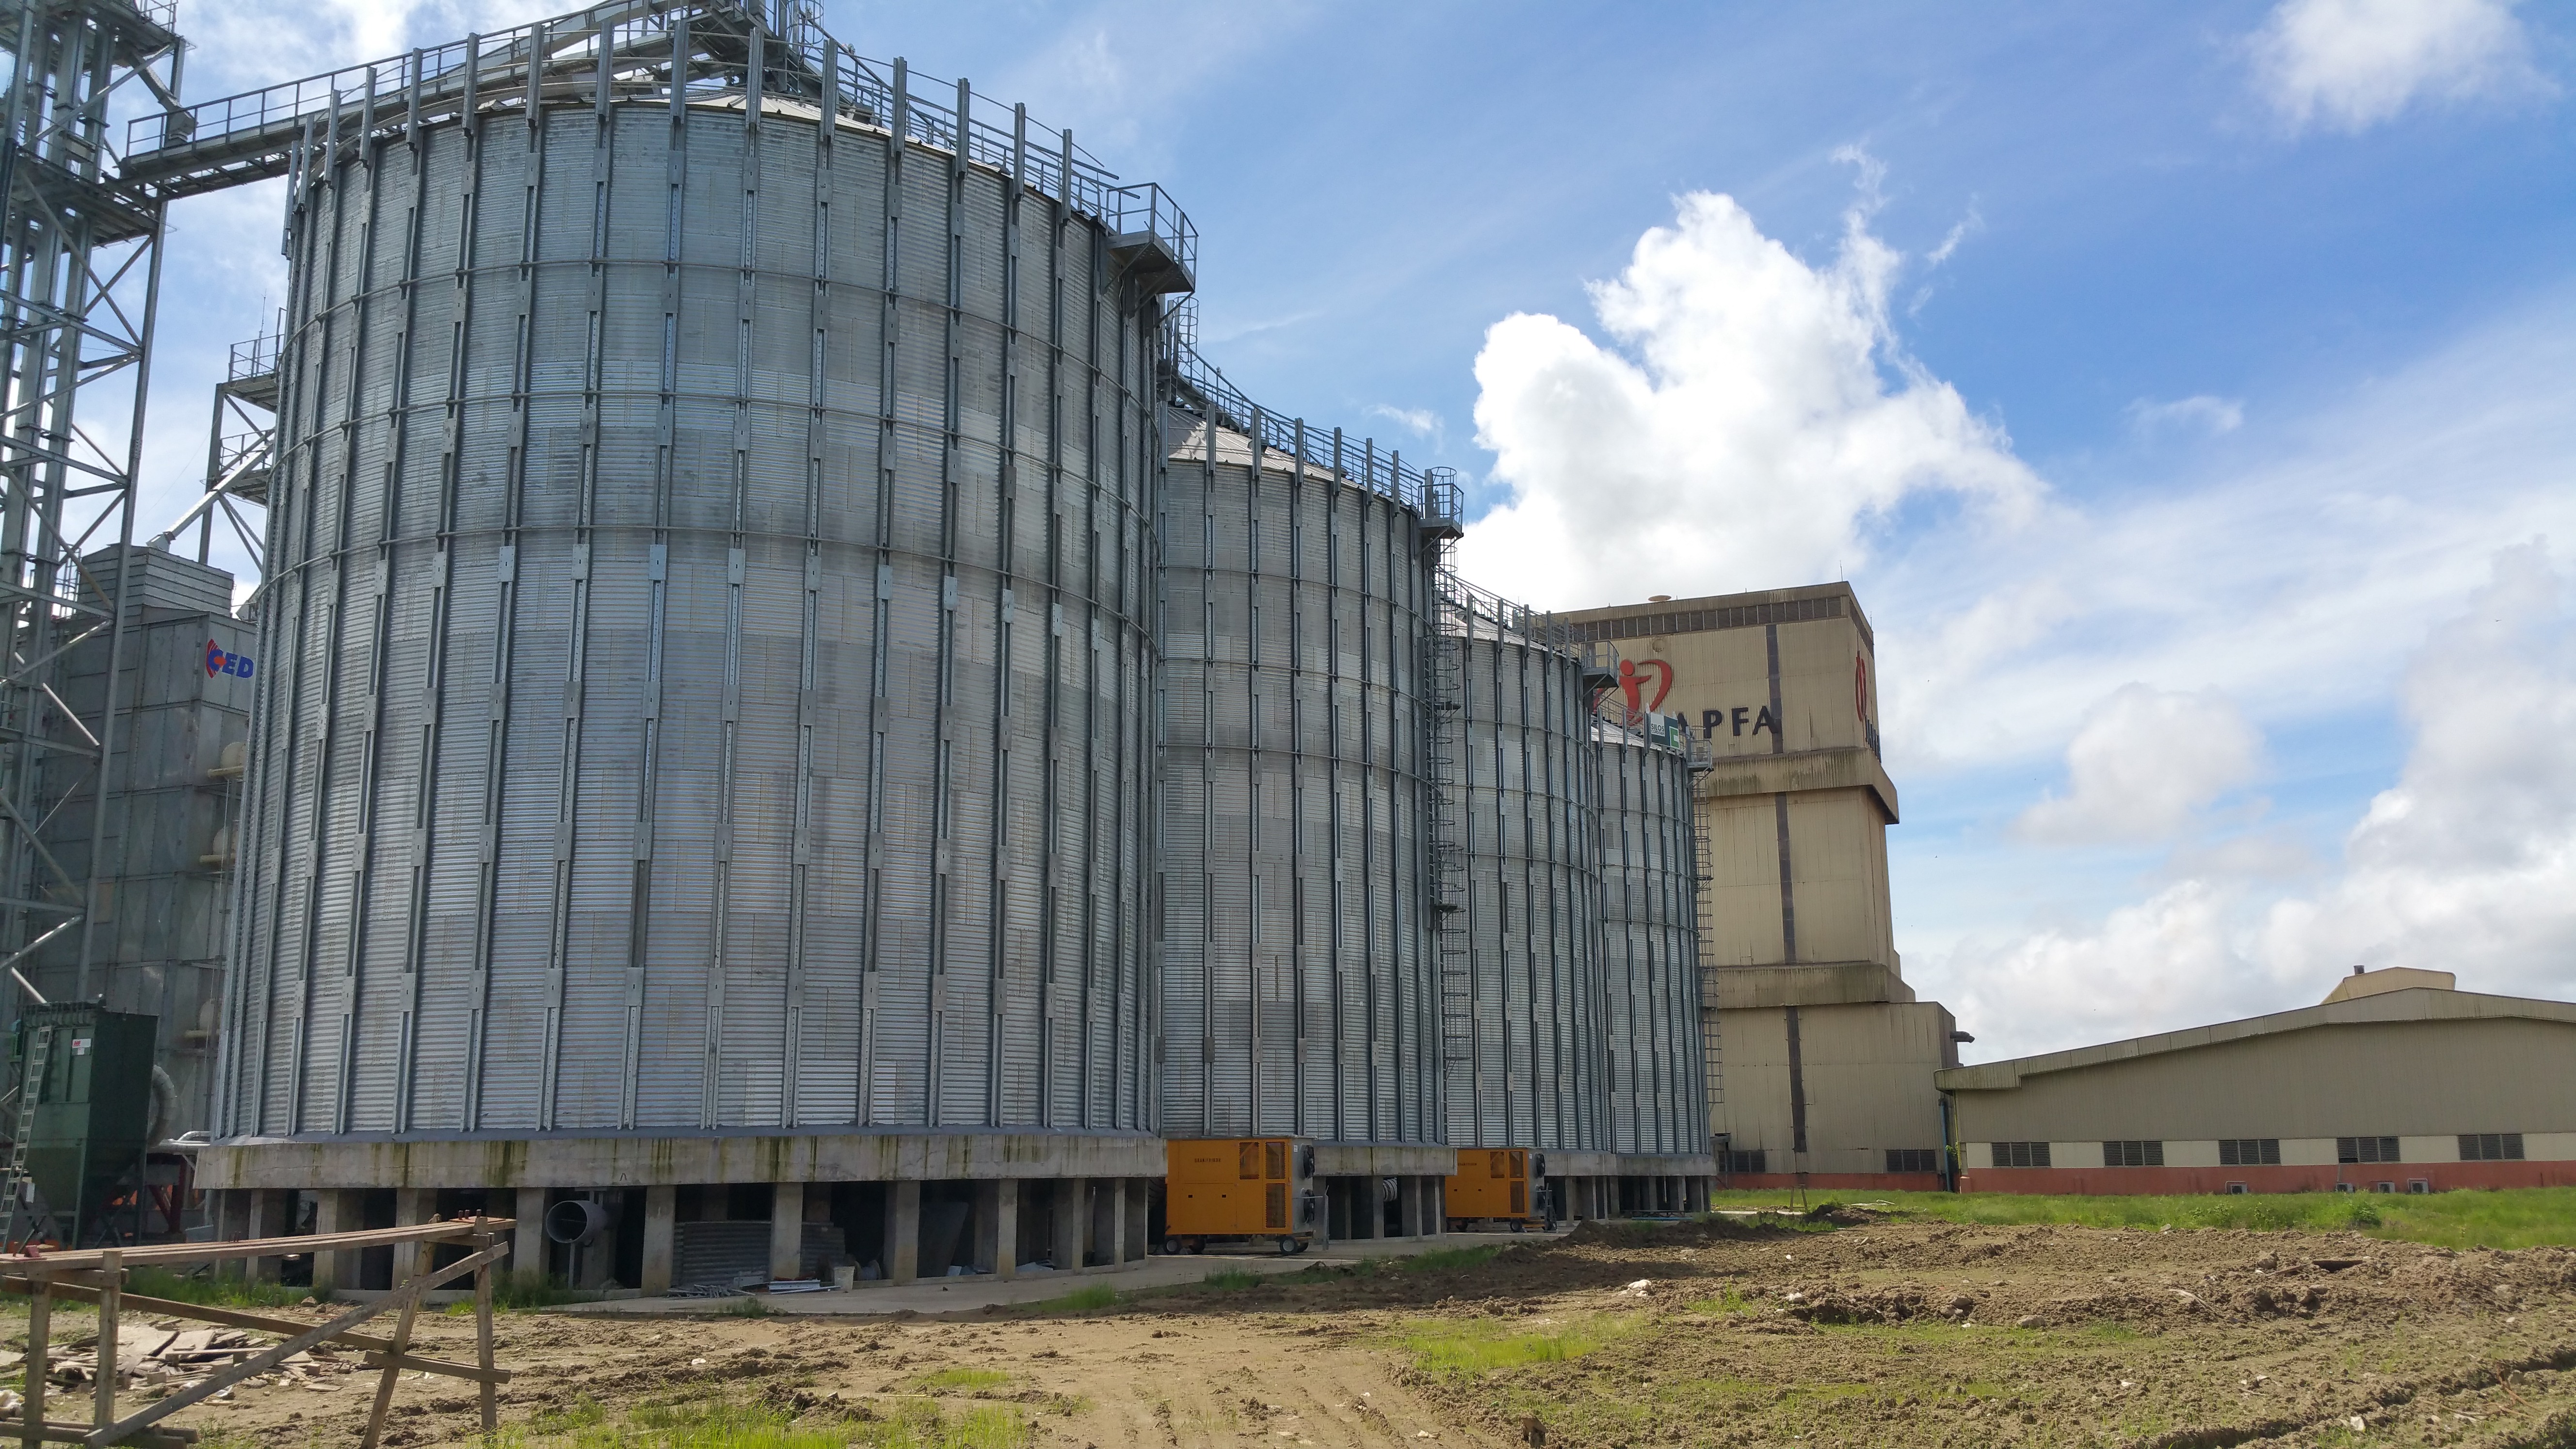 Cooling conservation grain-feed 